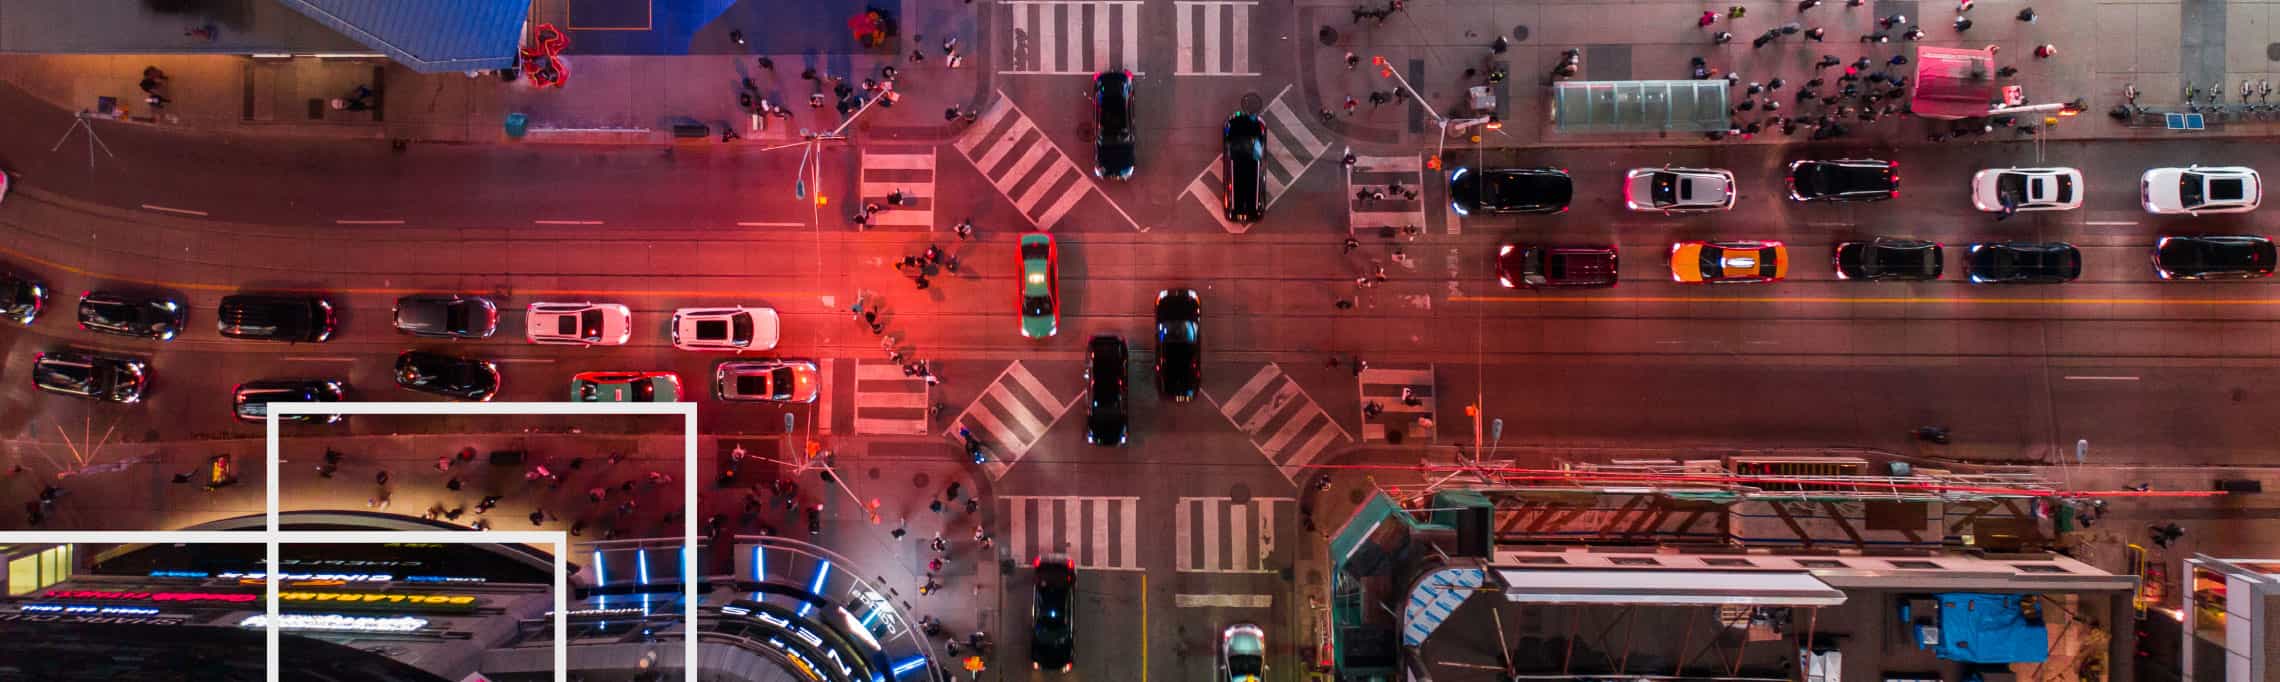 drone shot of the Yonge and Dundas intersection at night, with transparent shapes overlaid on top